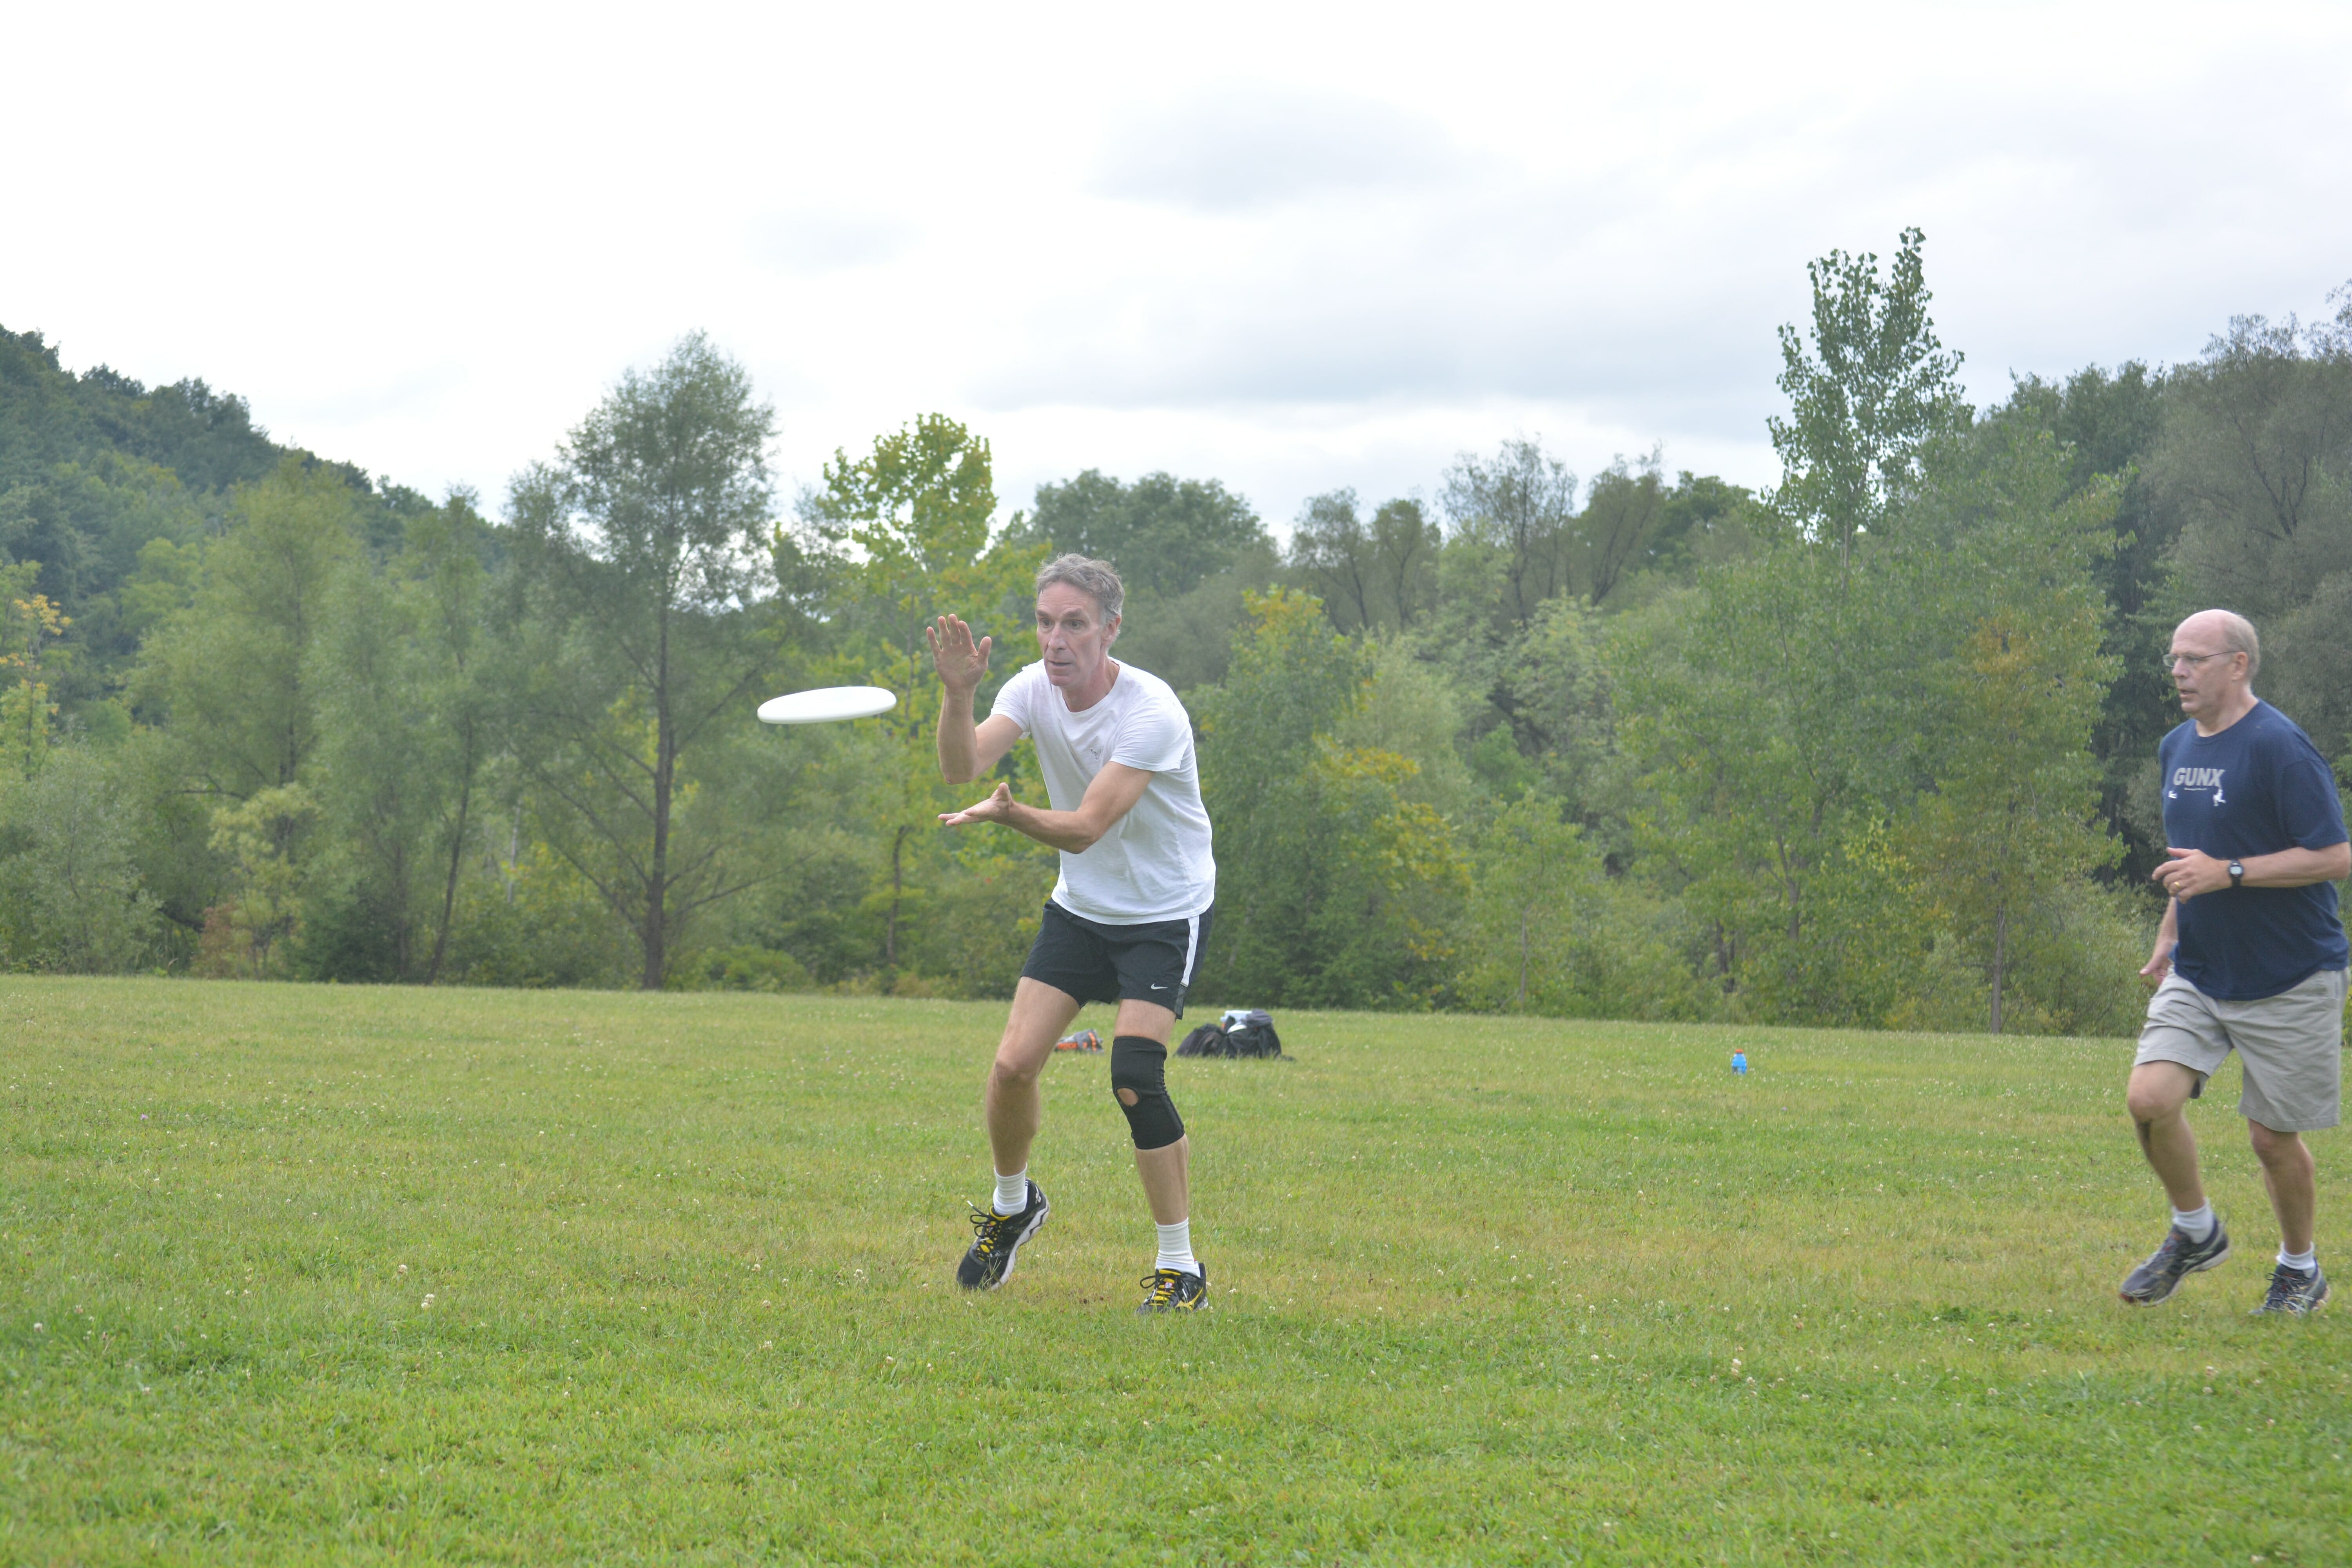 Bill Nye The Science Guy catching a disc in an ultimate game.